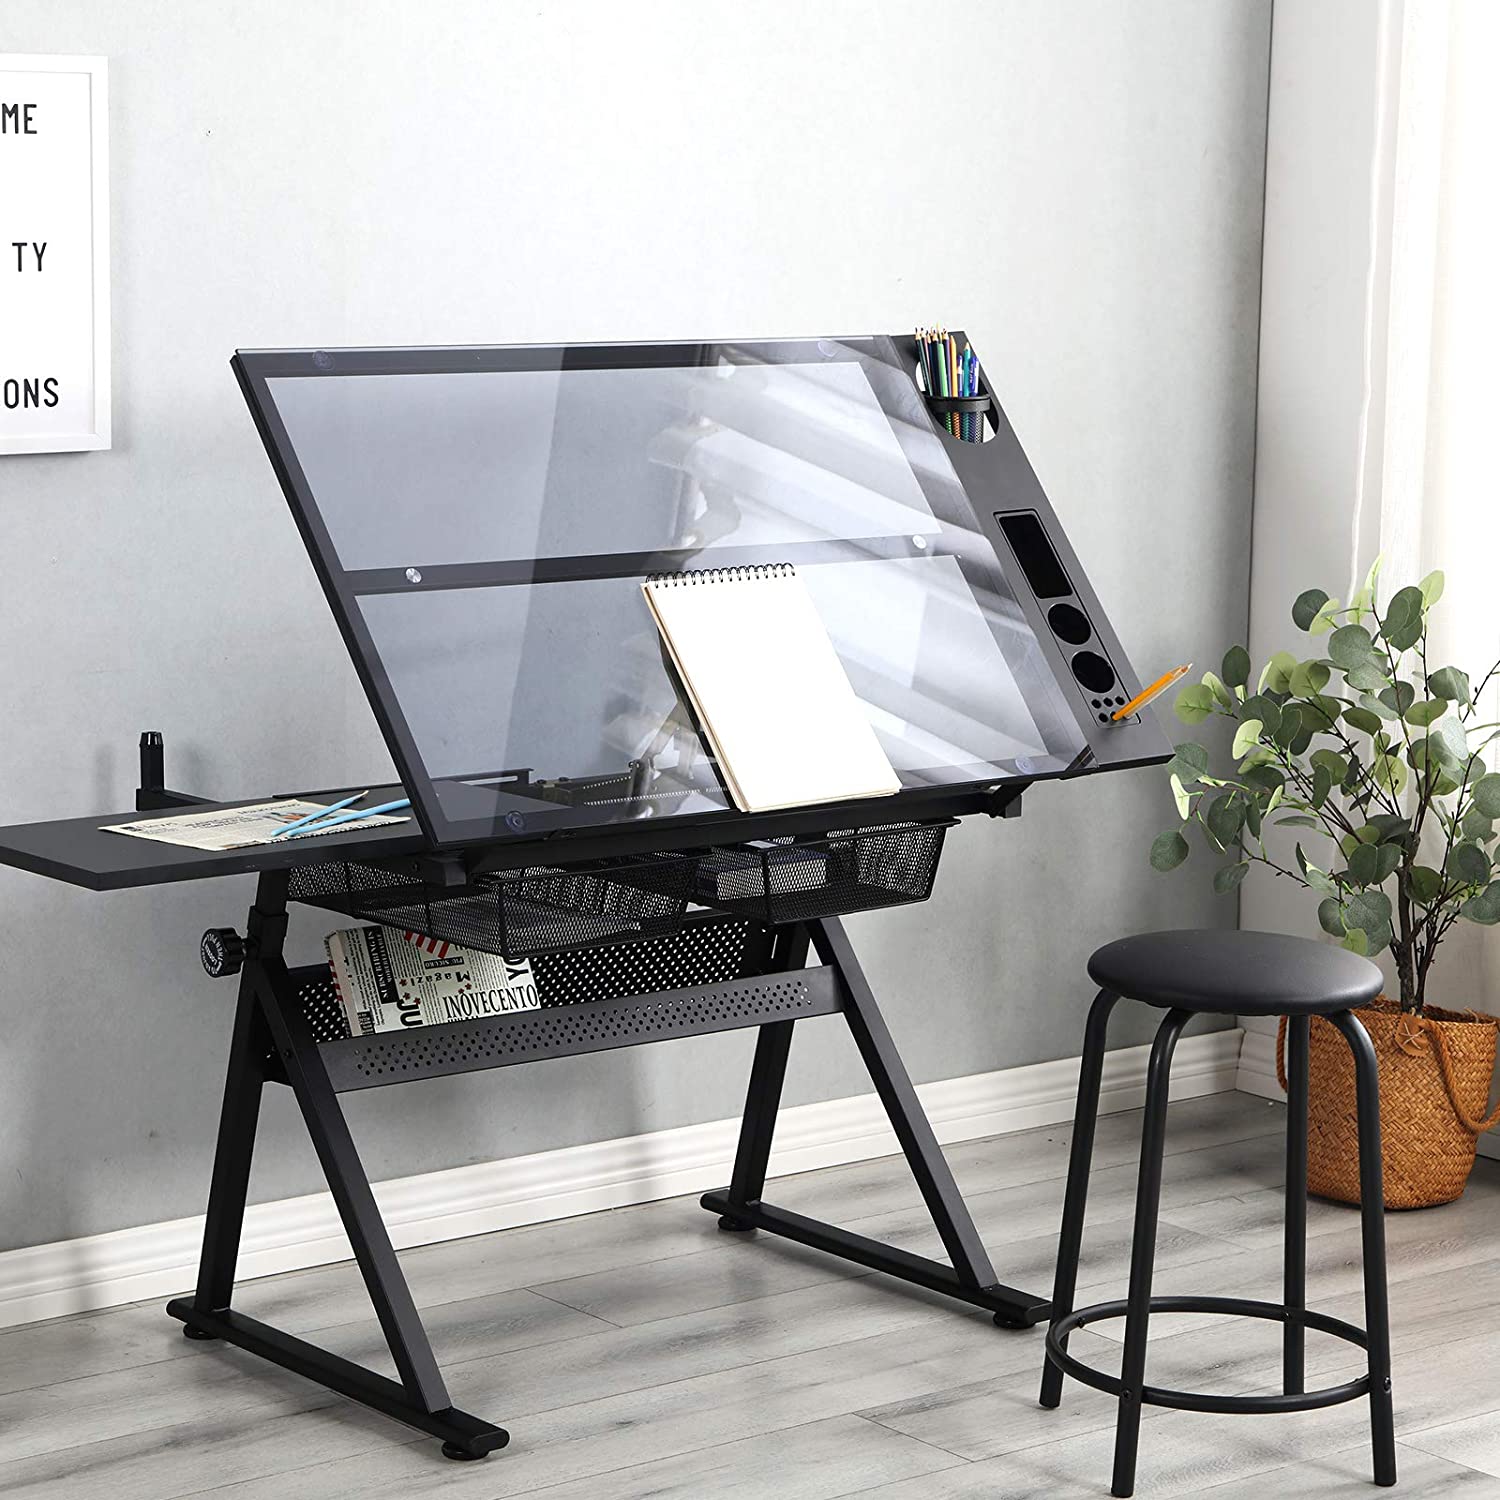 New Pattern Drafting table with stool drawers and side table by Artist ...